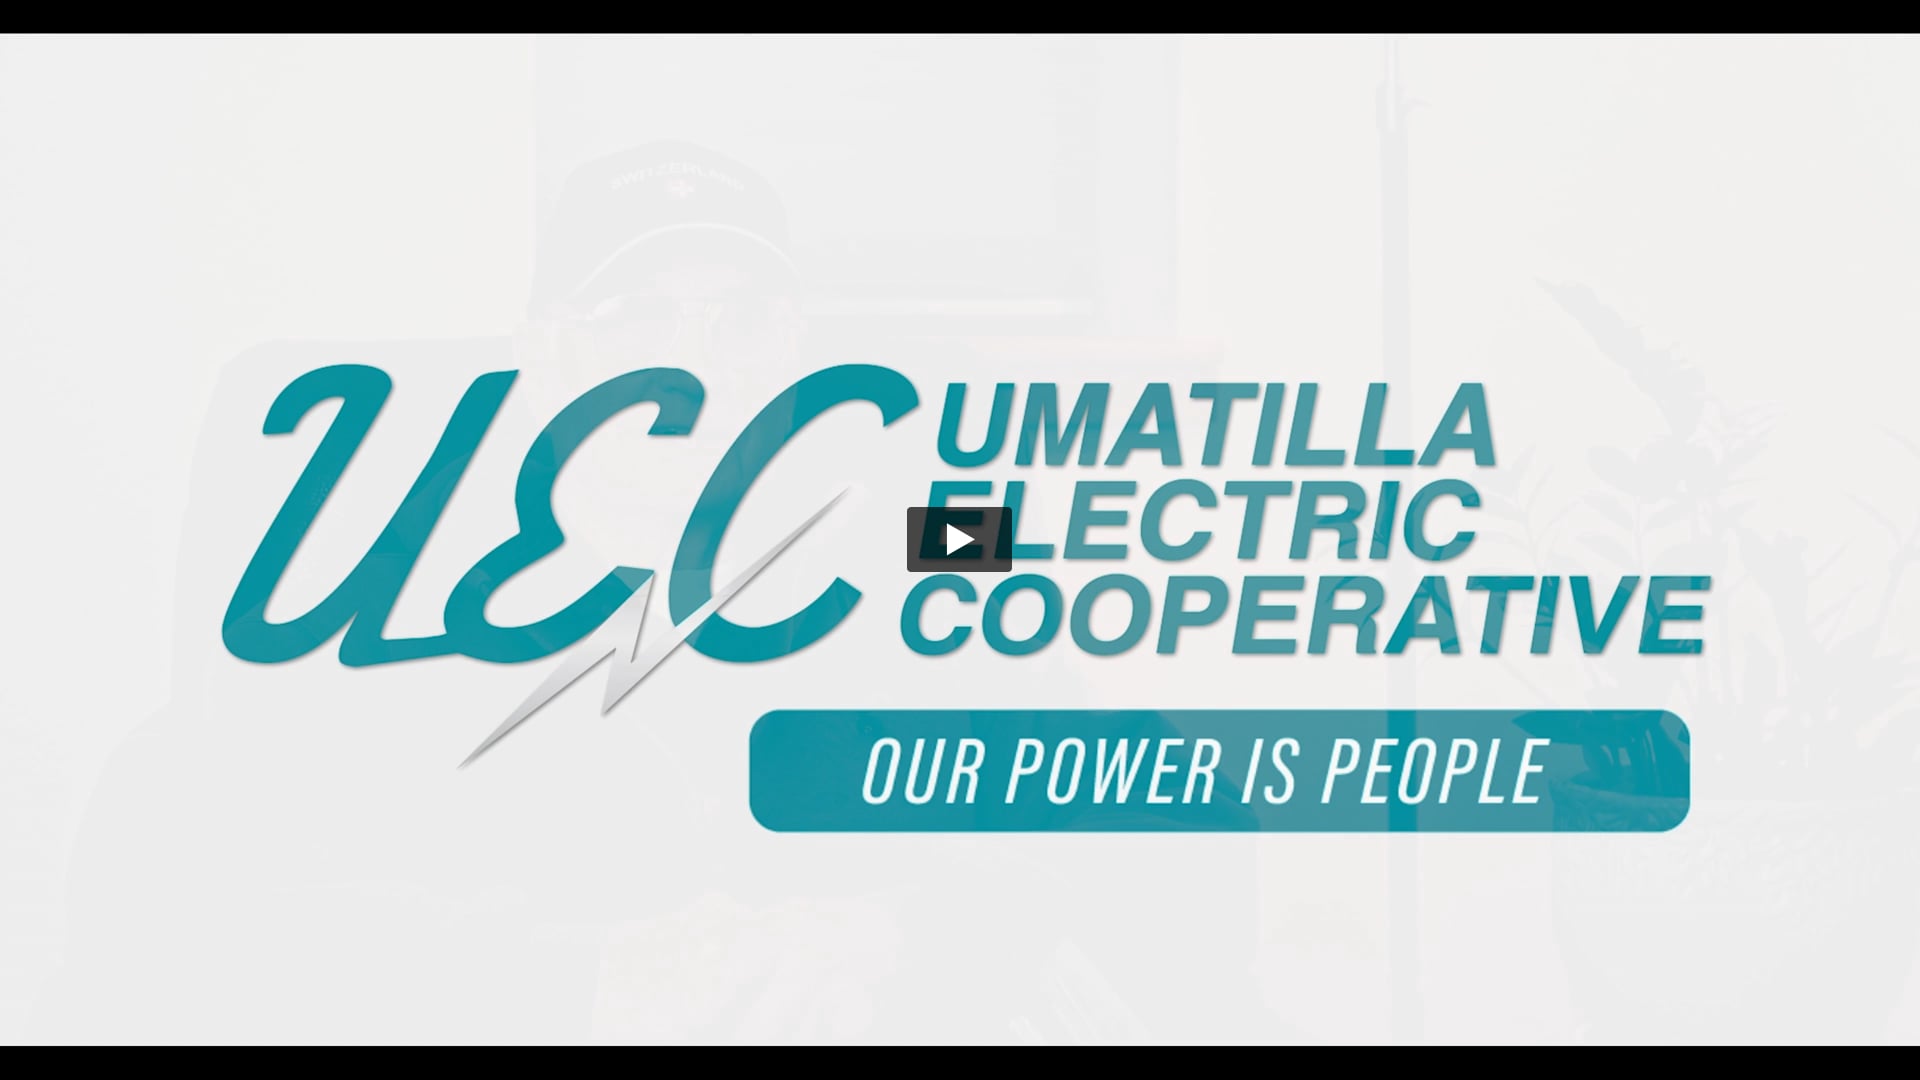 Image of UEC logo and tagline of Our Power is People